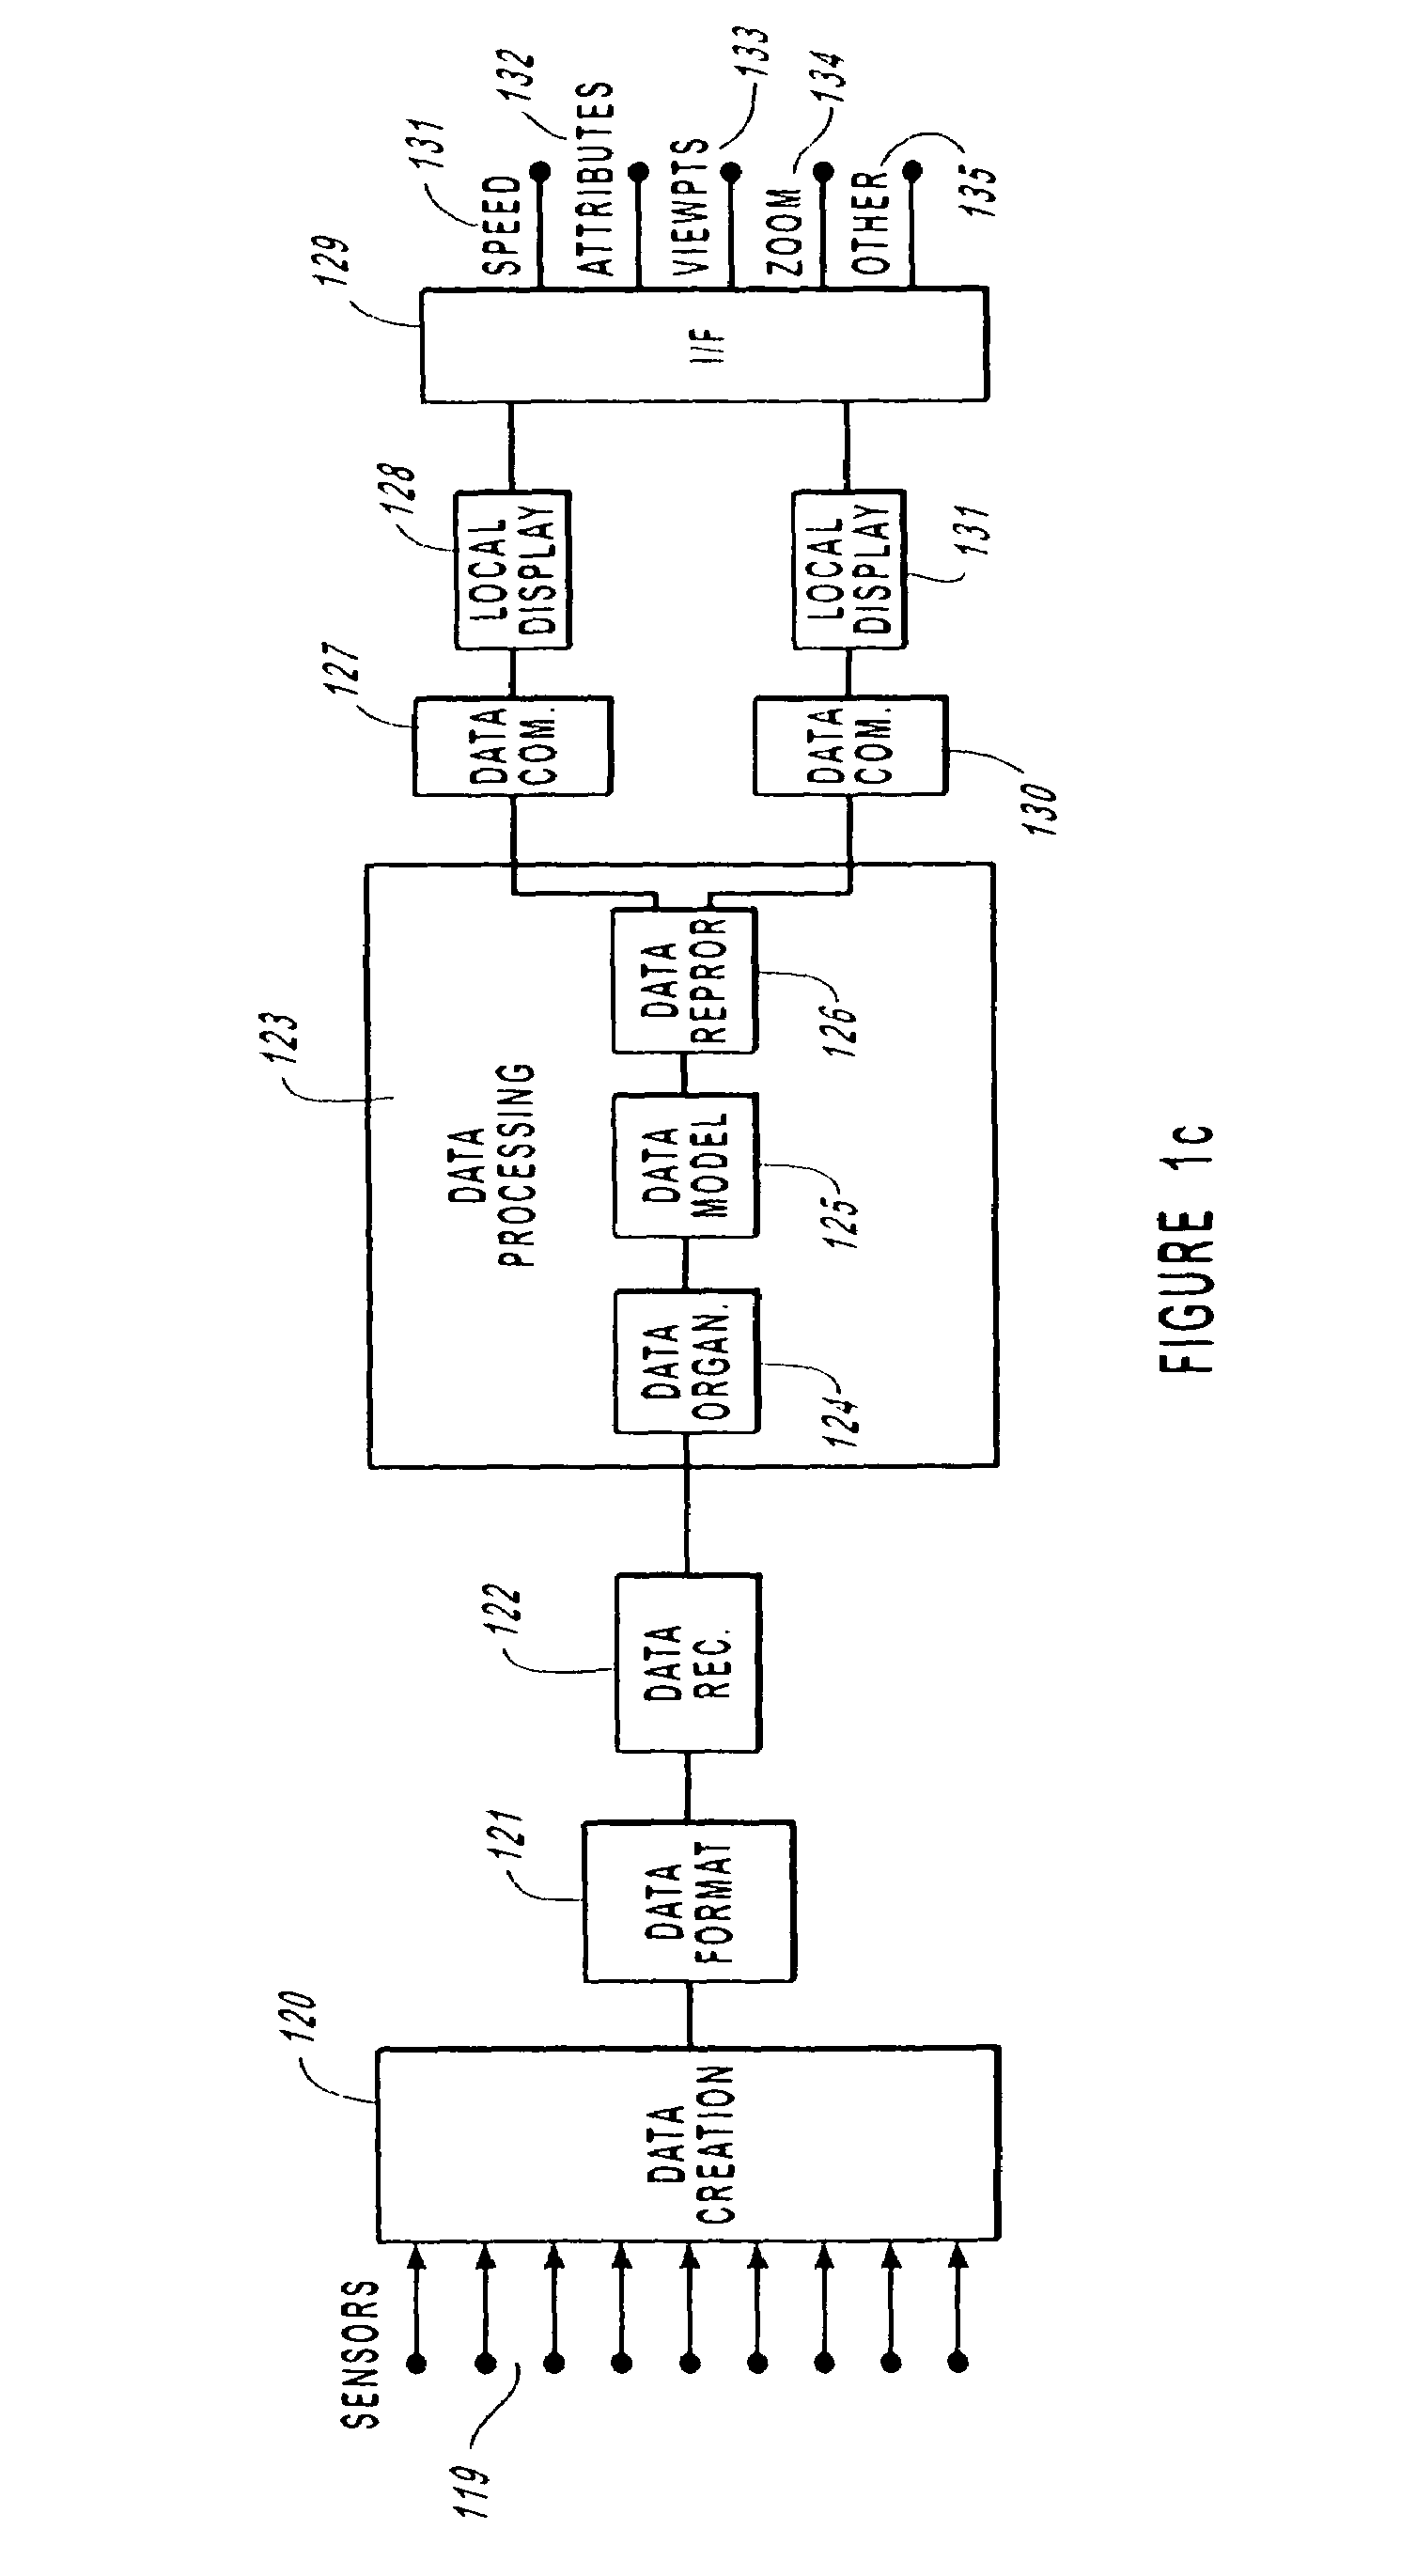 Method and apparatus for monitoring dynamic systems using n-dimensional representations of critical functions